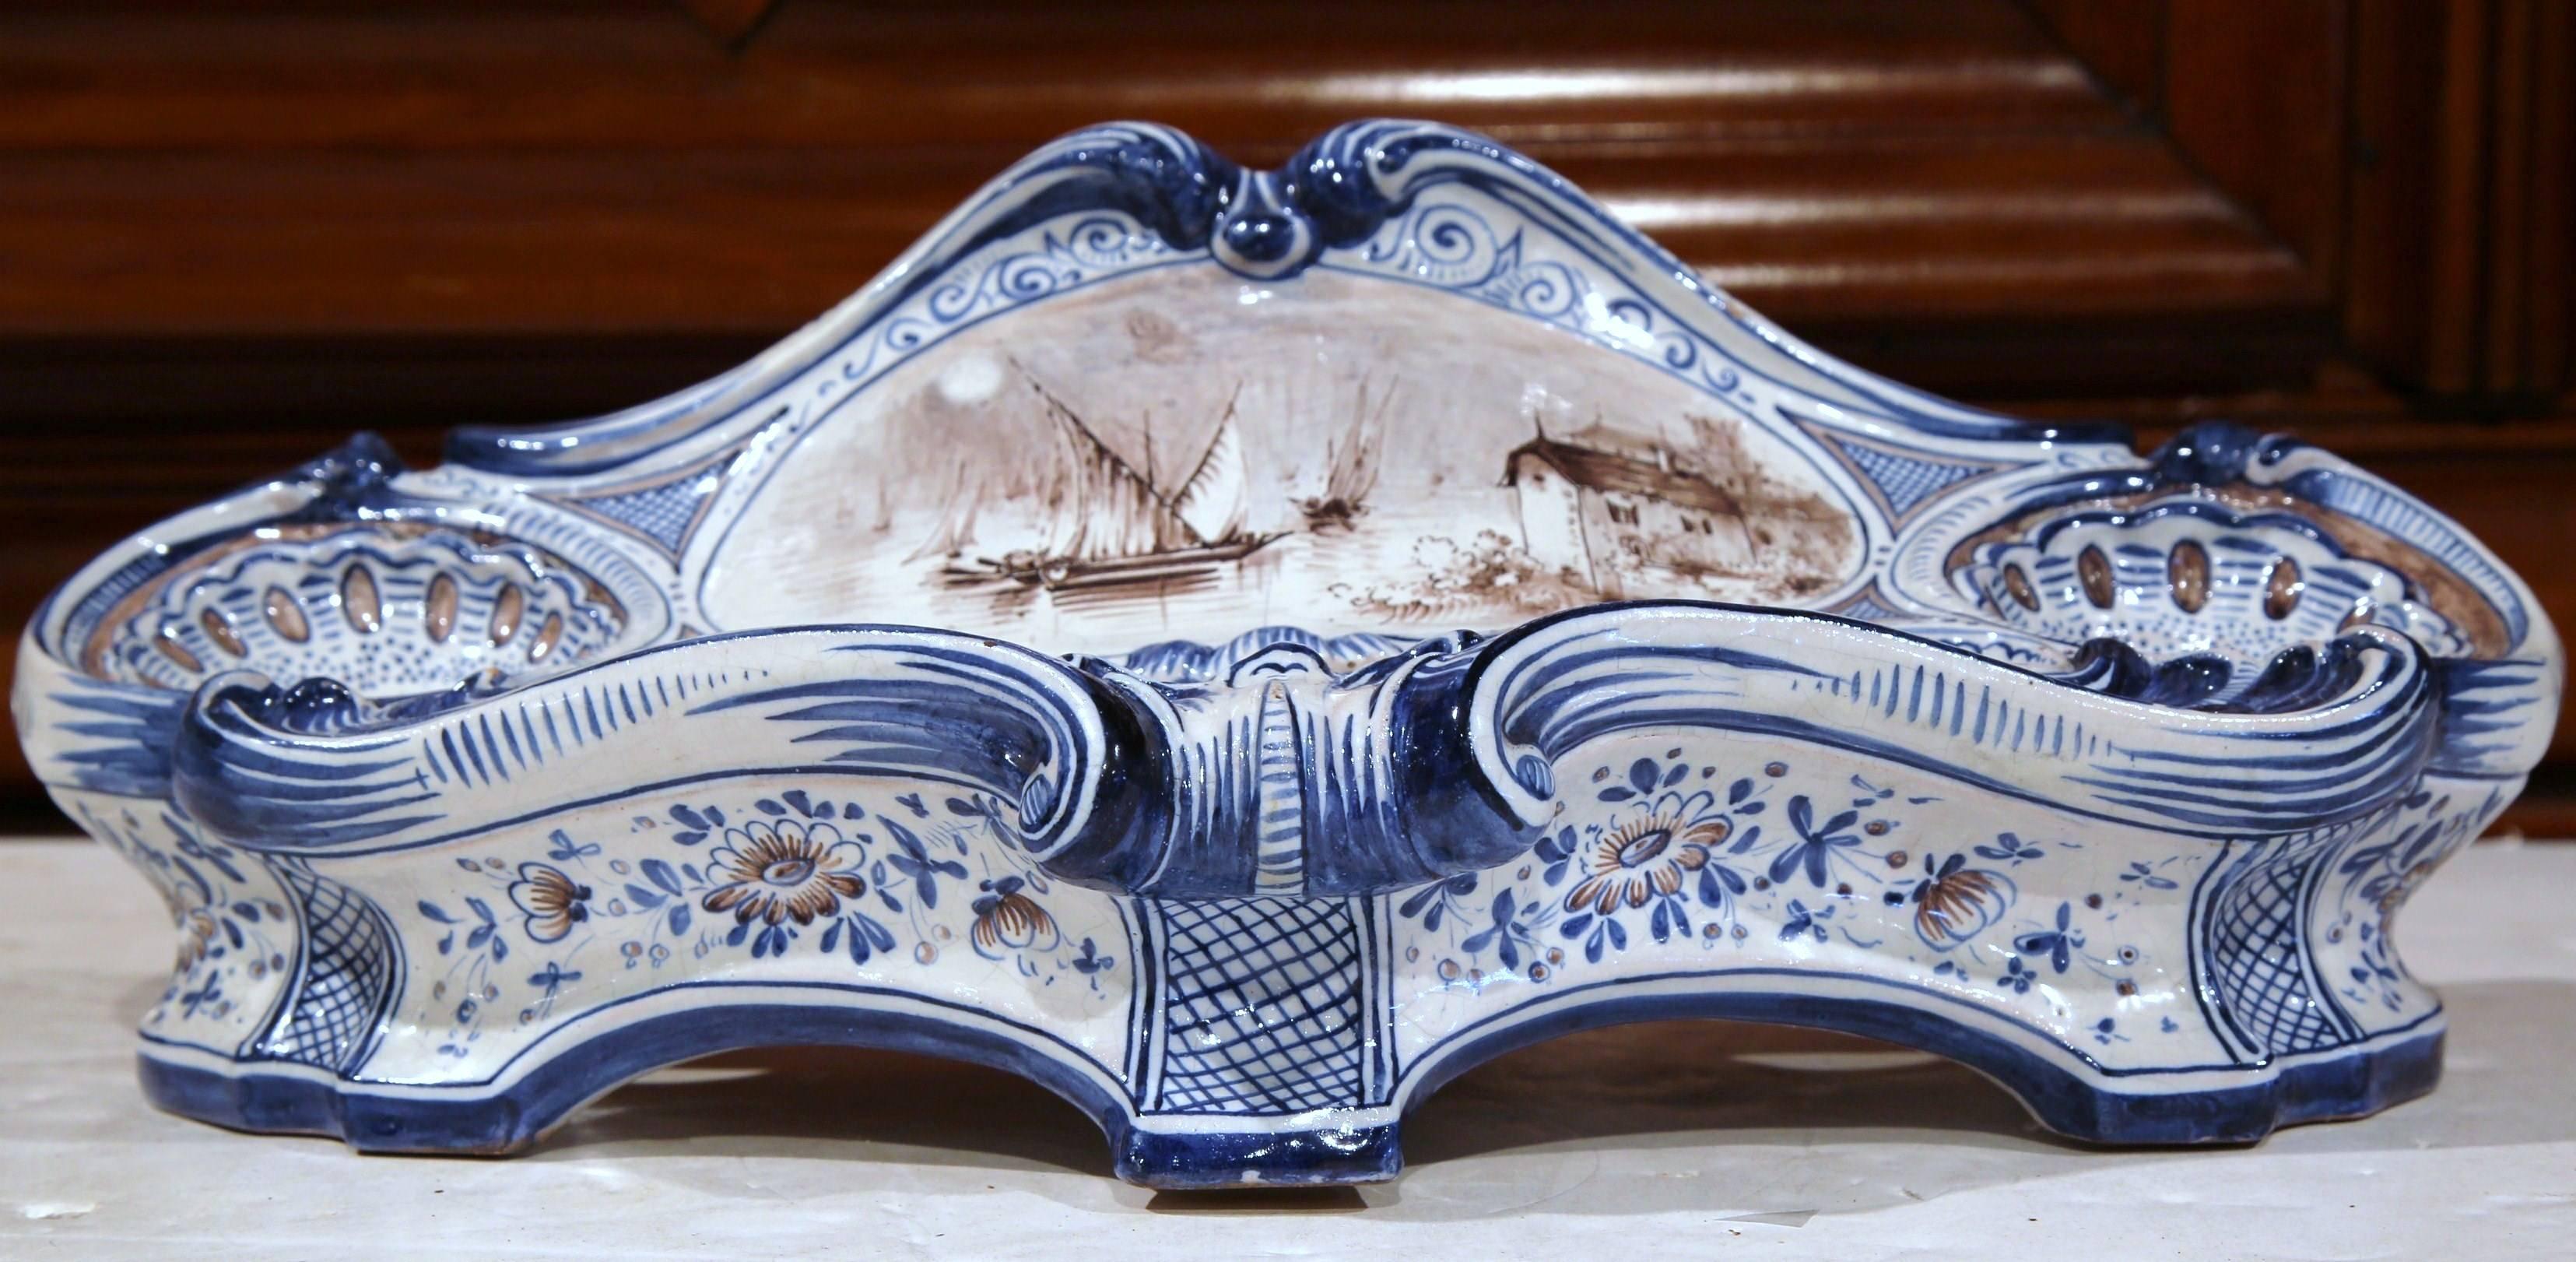 This uniquely shaped ceramic inkwell was sculpted in France, circa 1880. The cartouche-shaped desk essential features a hand painted black and white center medallion with sailboats, farm house and blue floral motifs. The blue and white palette along